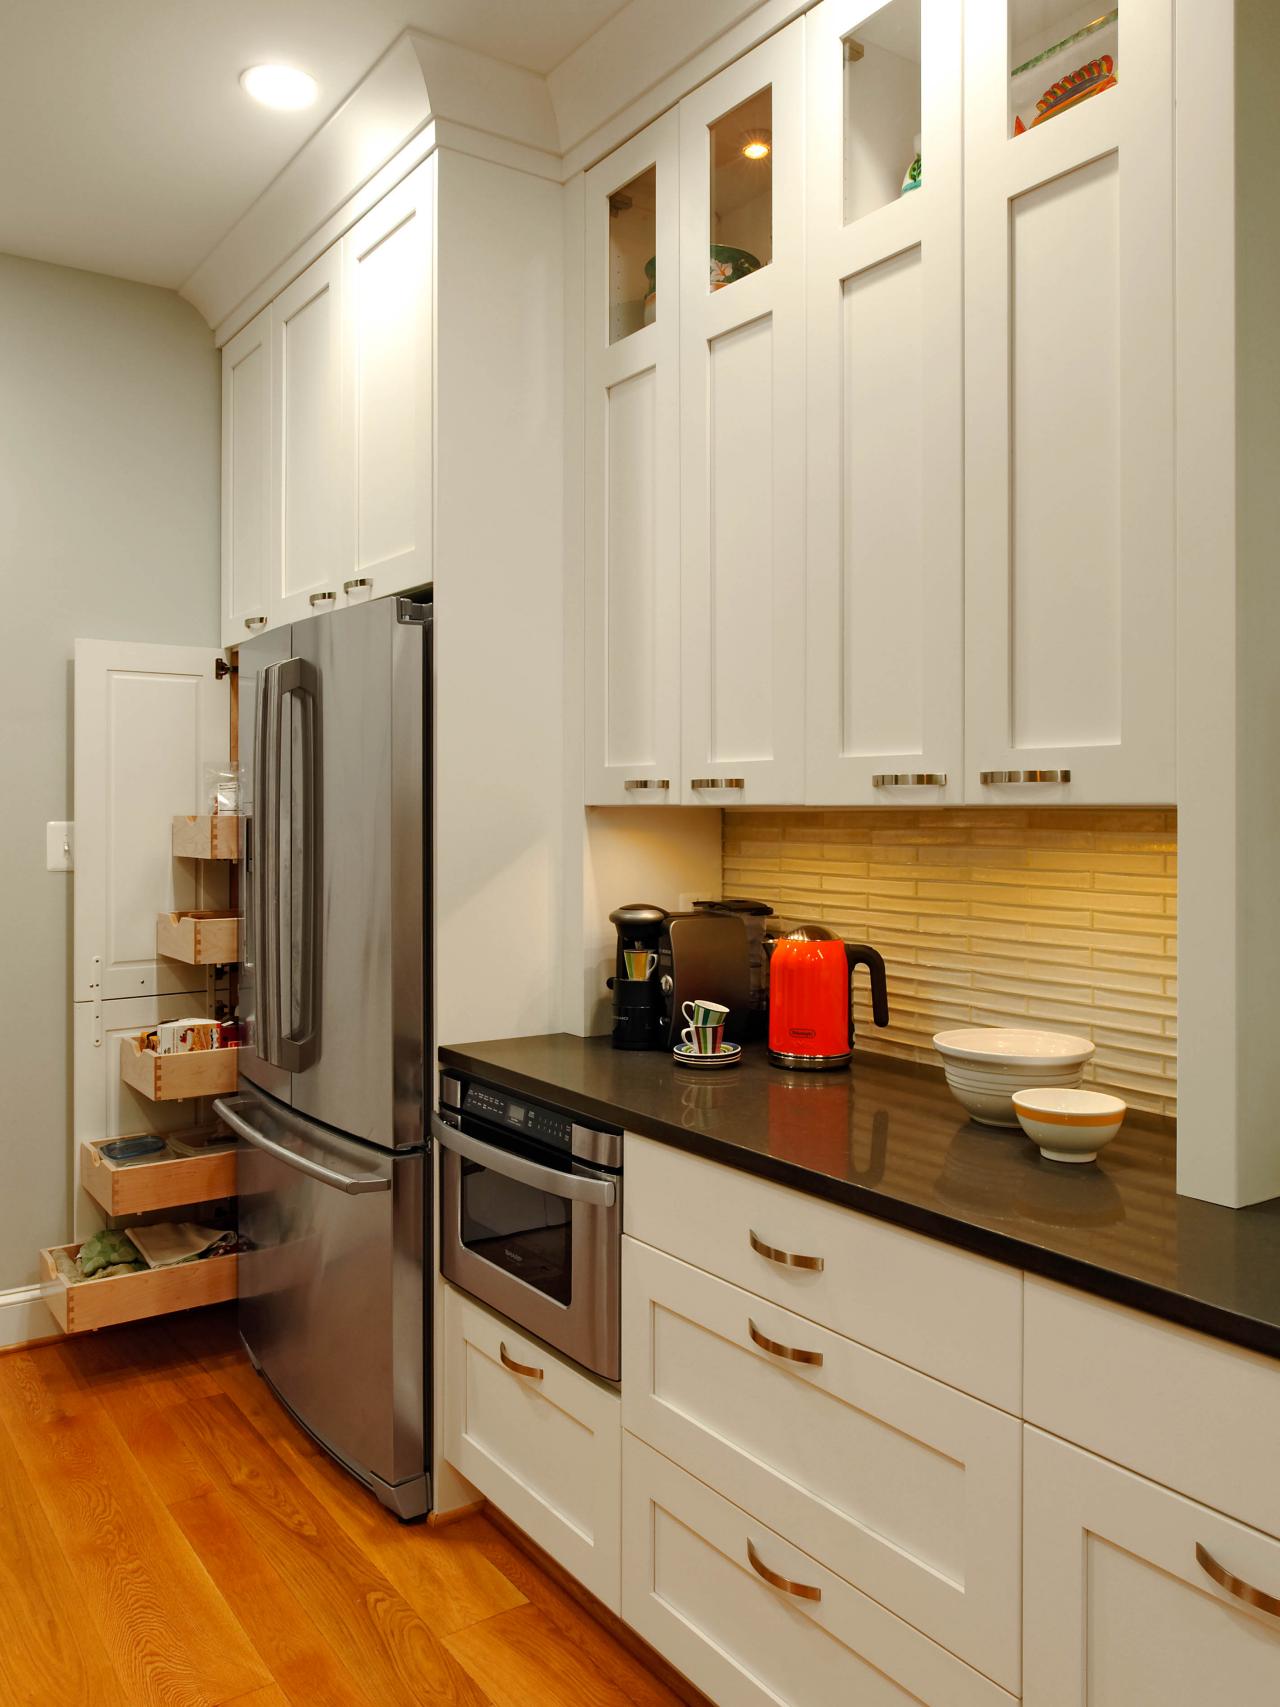 Cheap Kitchen Cabinets Pictures Ideas Tips From HGTV HGTV